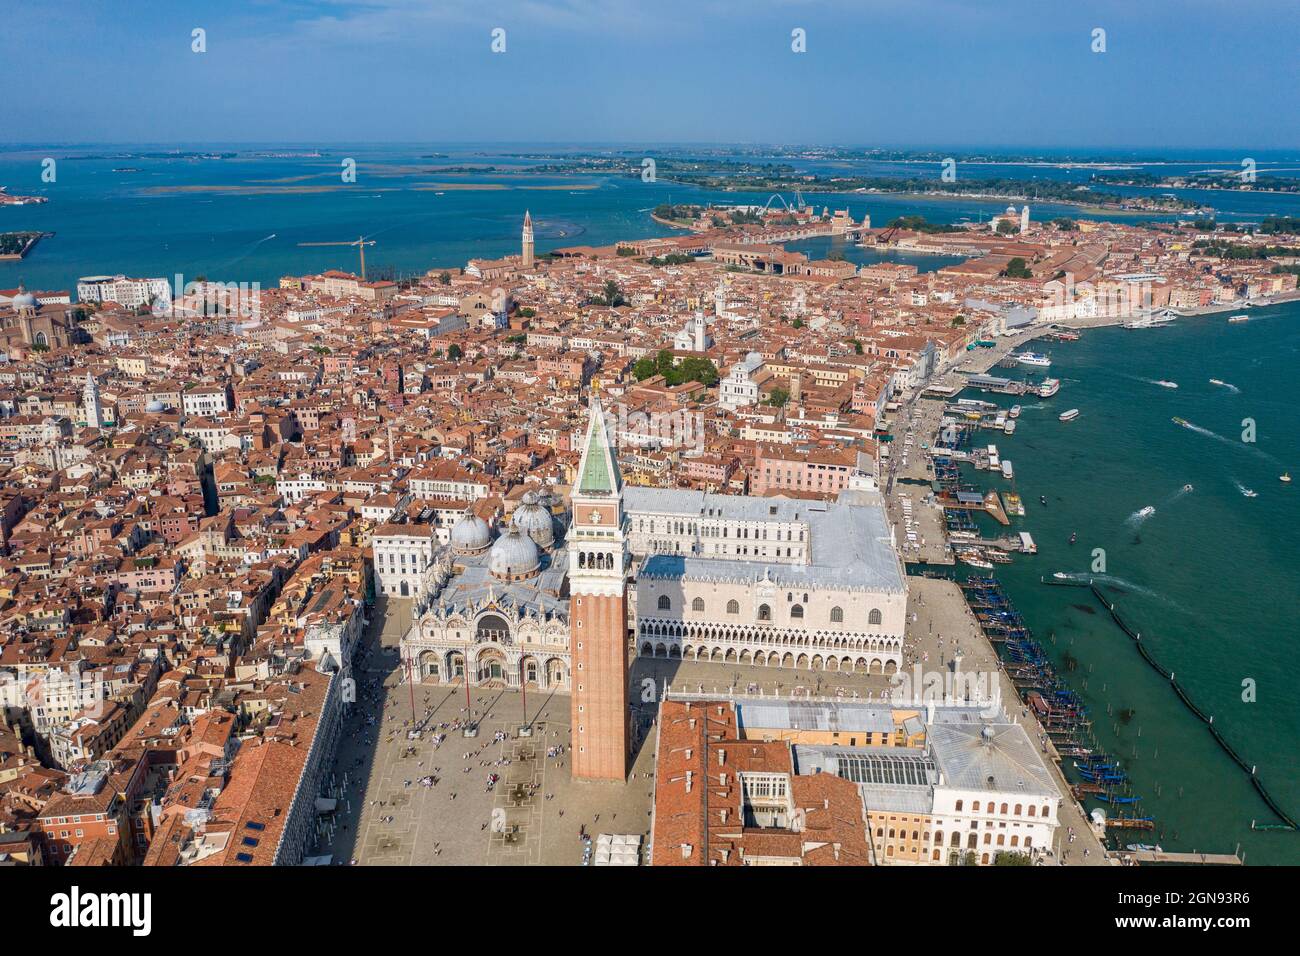 Italy, Veneto, Venice, Aerial view of Piazza San Marco with Doges Palace, Saint Marks Basilica and Saint Marks Campanile Stock Photo